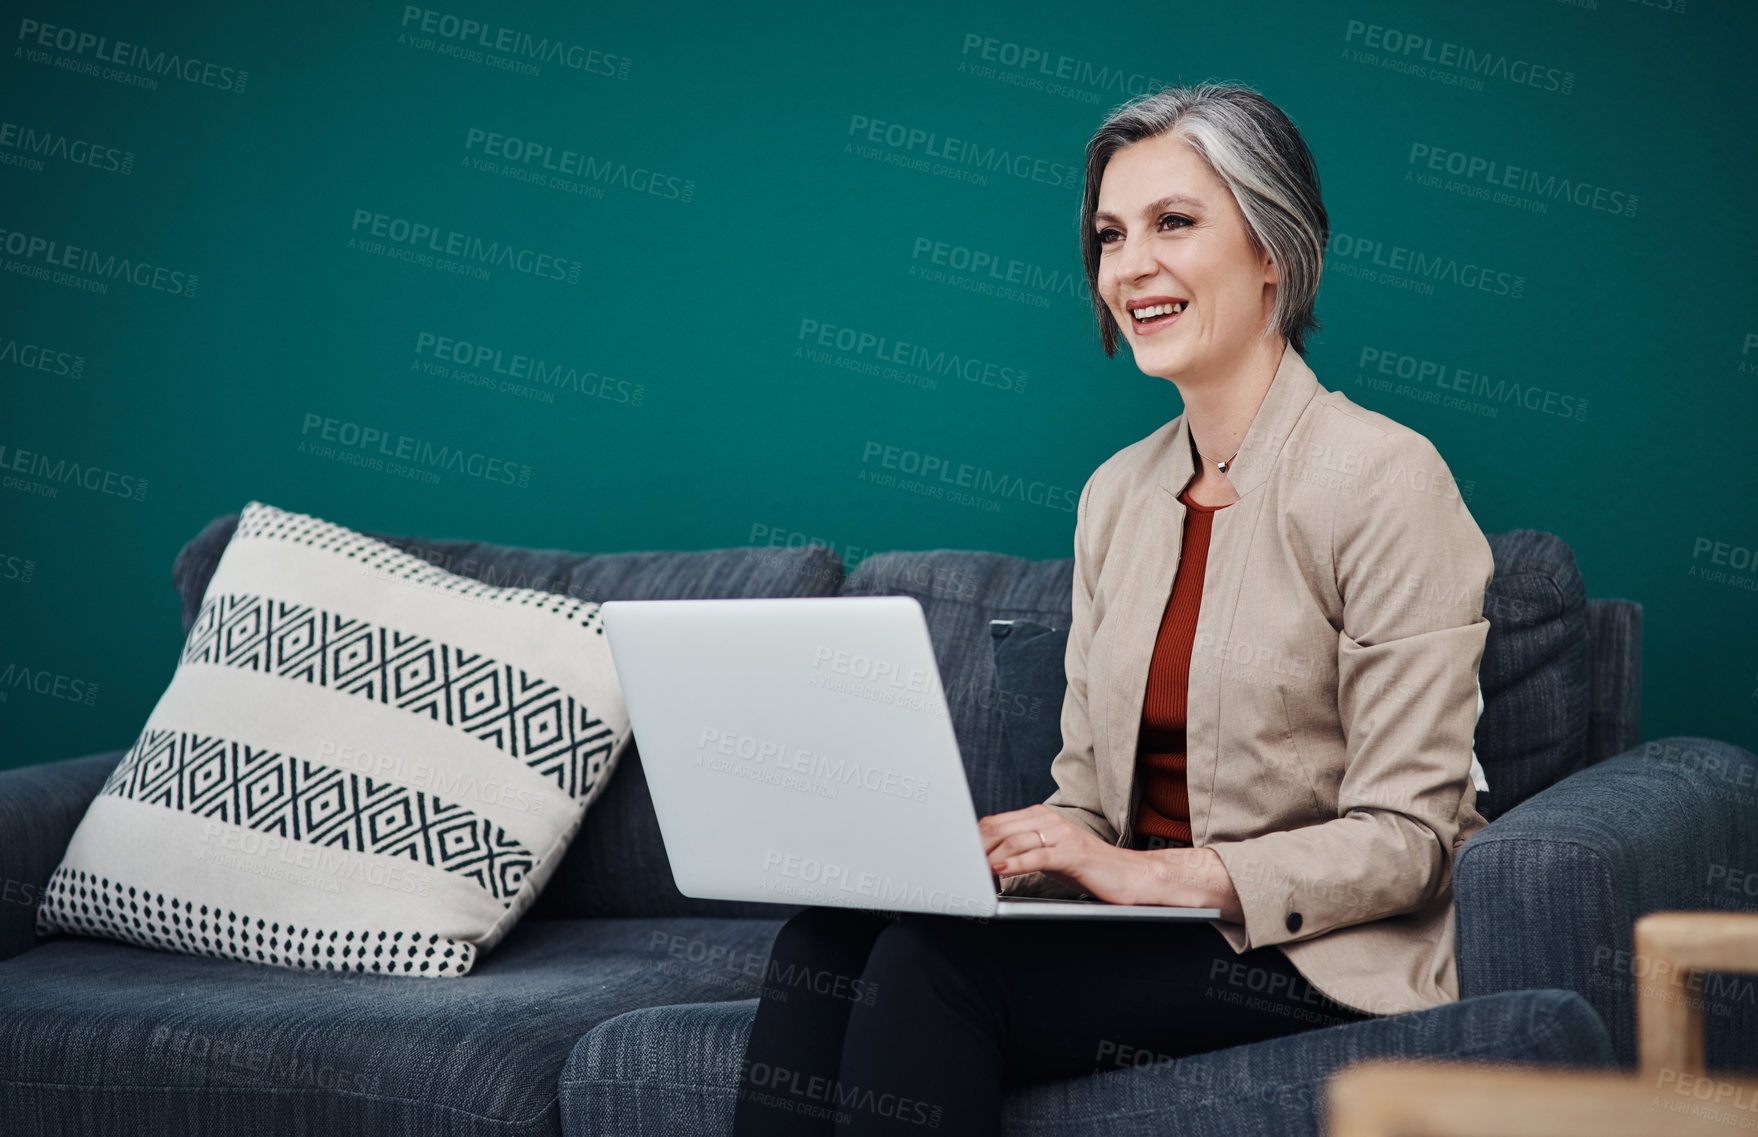 Buy stock photo Cropped shot of an attractive mature businesswoman sitting alone and using a laptop in her home office